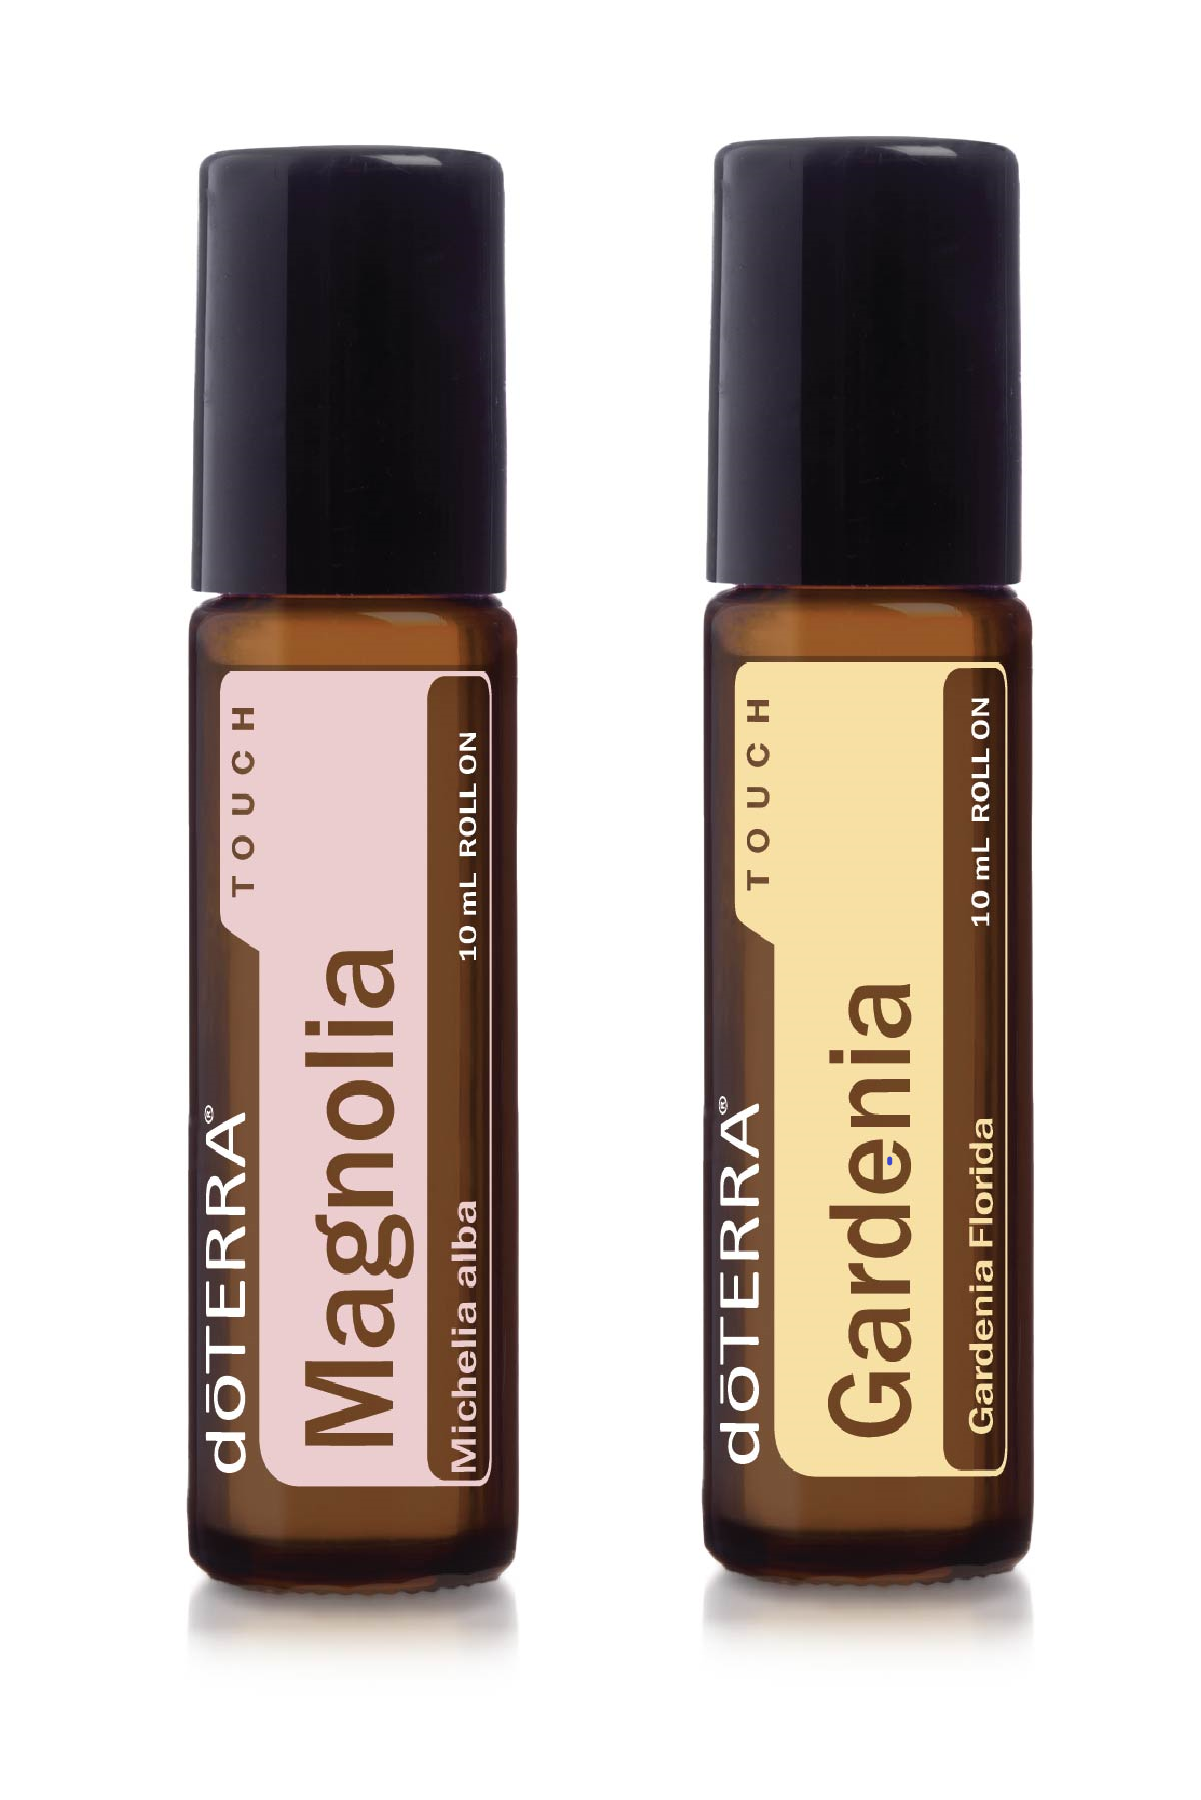 Magnolia Touch & Gardenia Touch Duo (10mL) by doTERRA - LIMITED TIME